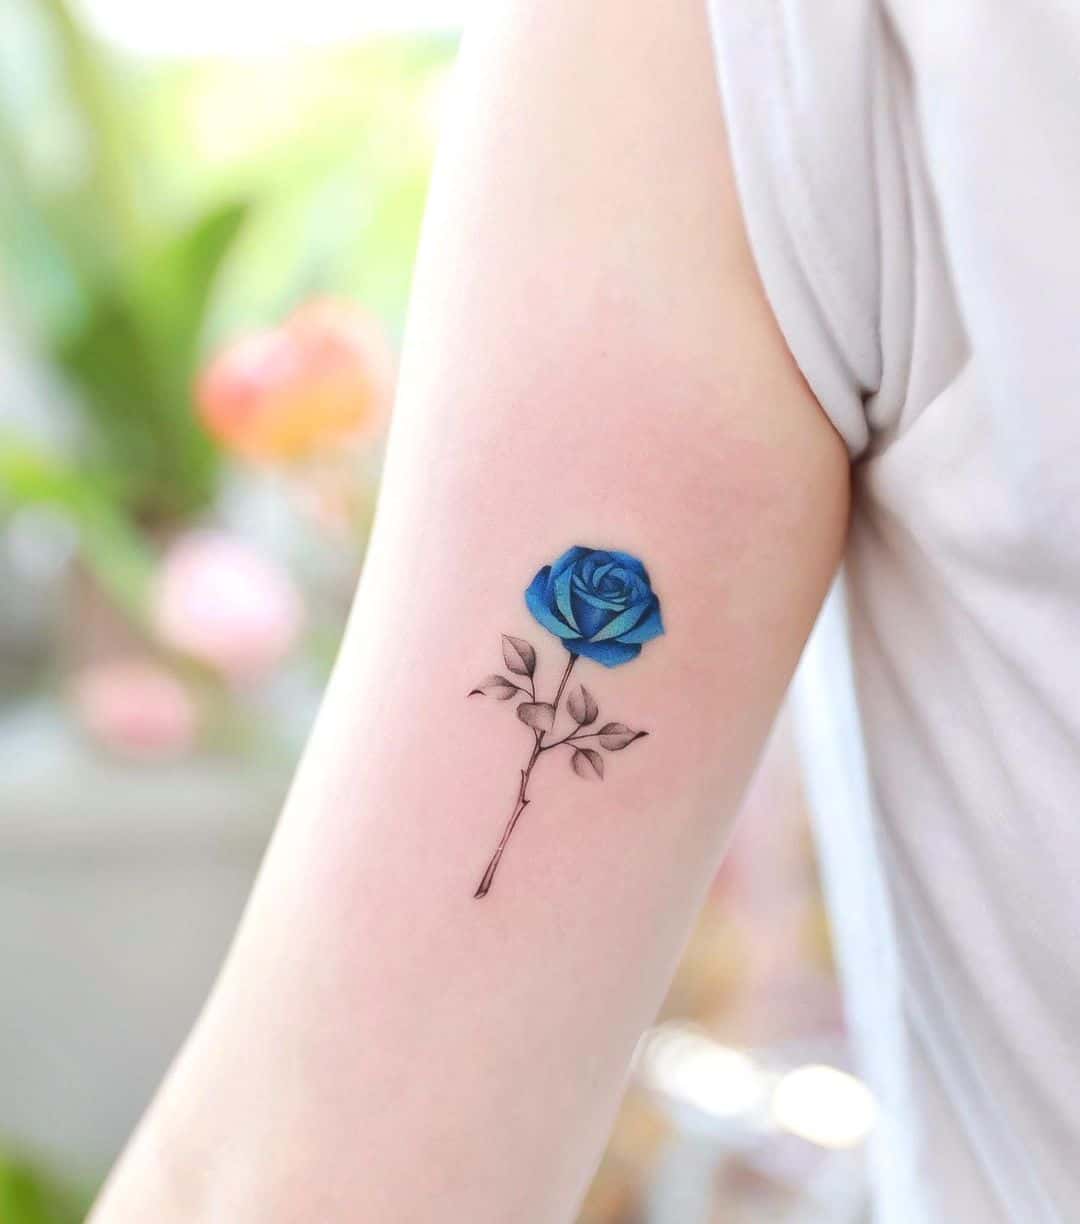 Blue rose tattoo by